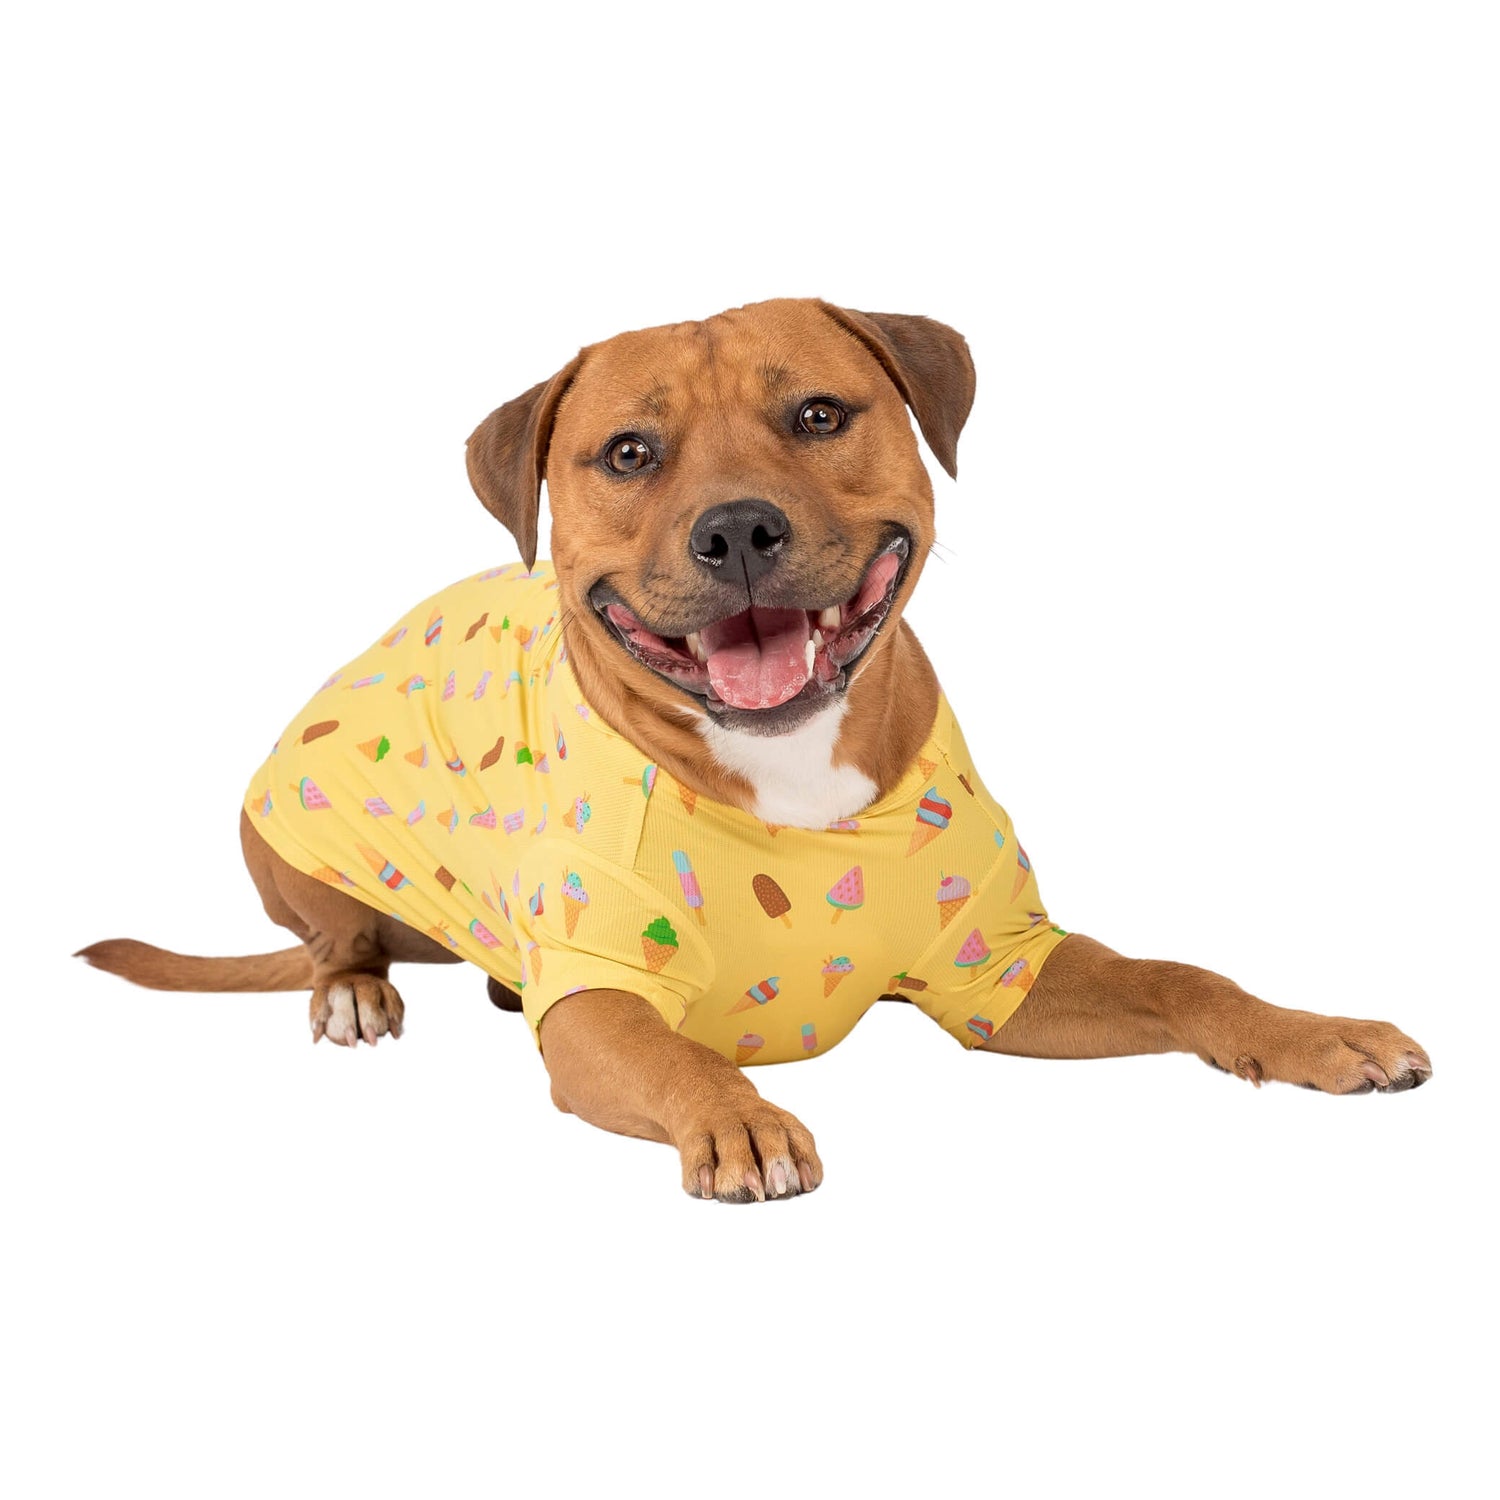 A Staffy wearing Vibrant Hounds Ice-cream dream cooling shirt. The shirt is yellow with ice creams and ice blocks printed on it.